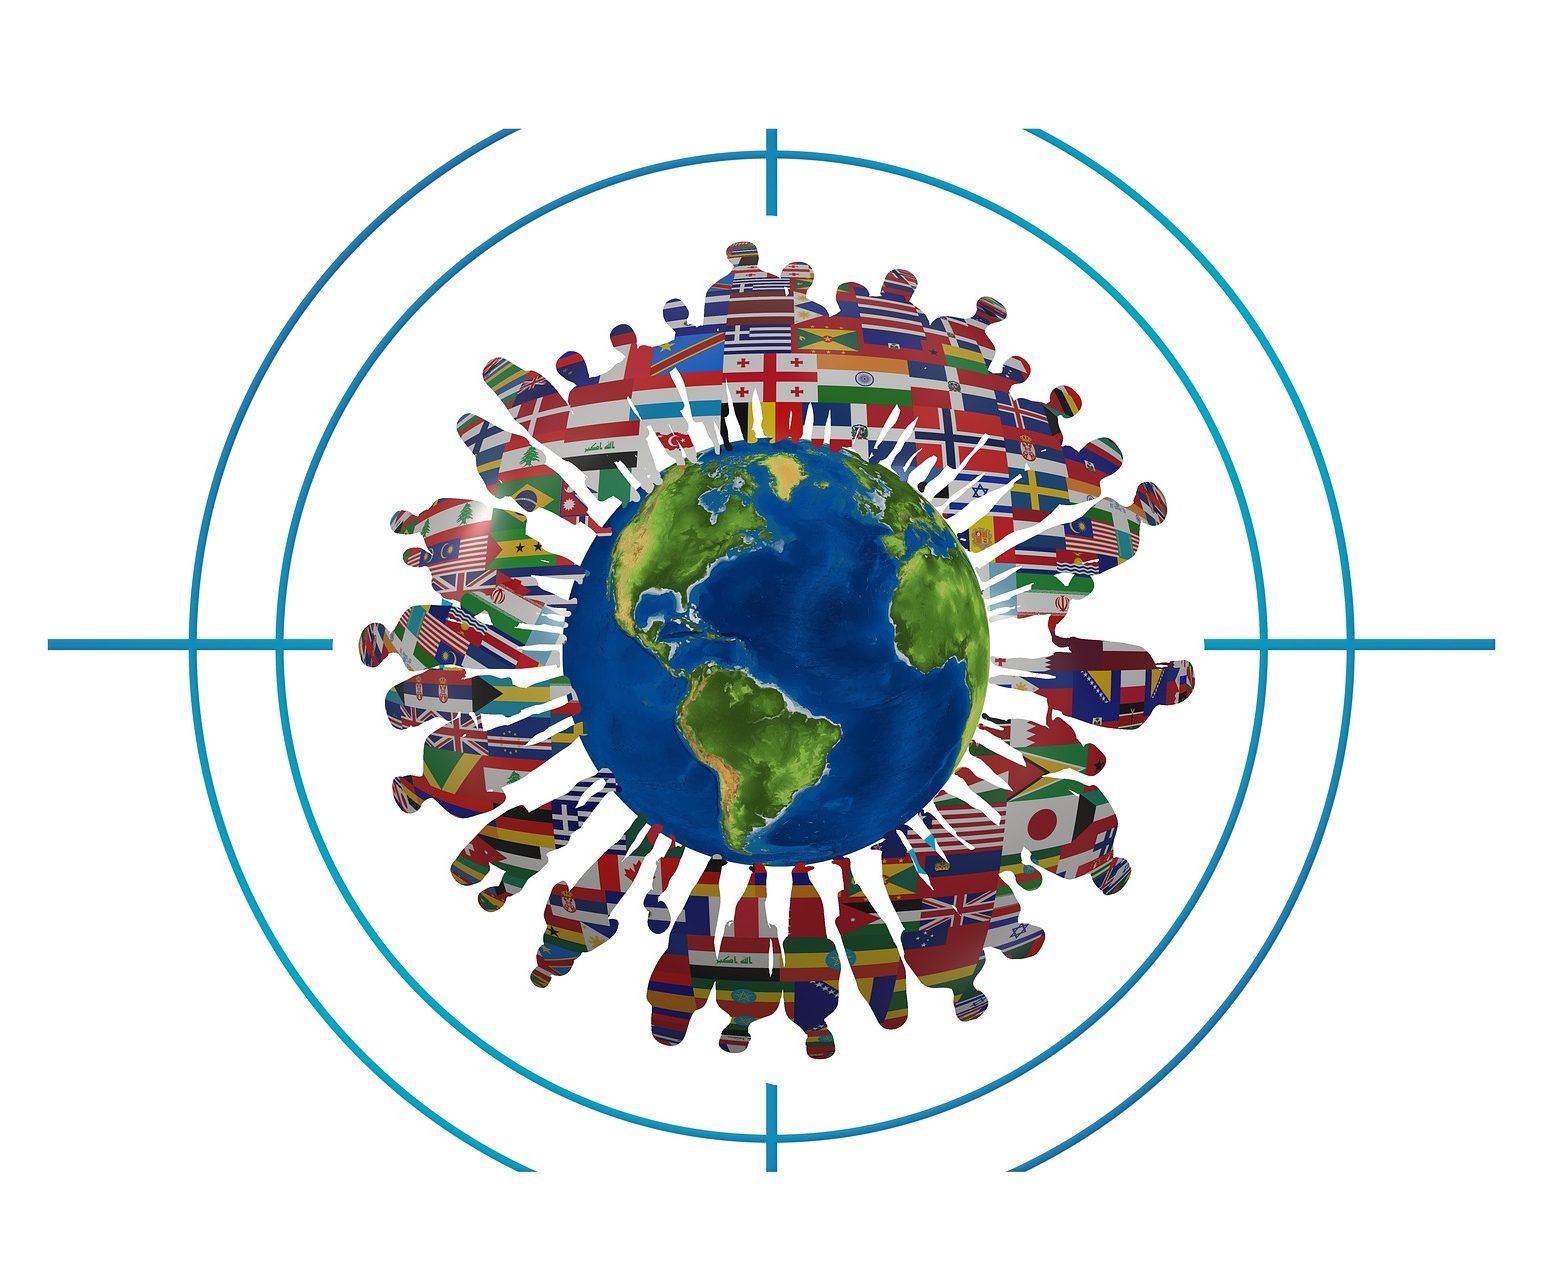 Image of a globe with the silhouettes of people standing on the circumference of the globe. The silhouette of the people has been filled in with the flags from countries in the world.